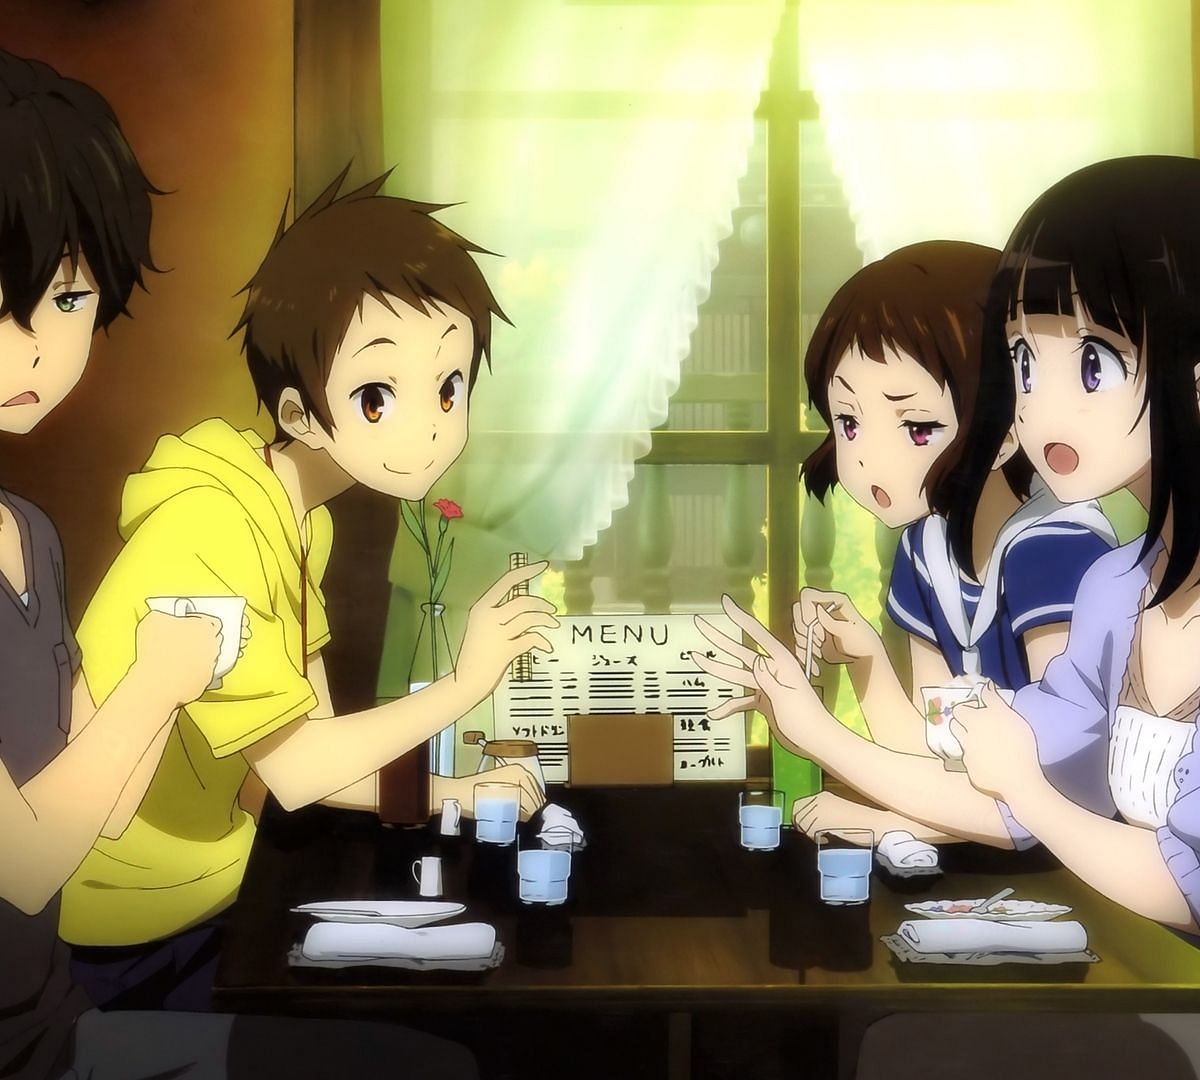 Hyouka characters as seen in the anime (Image via Kyoto Animation Studios)